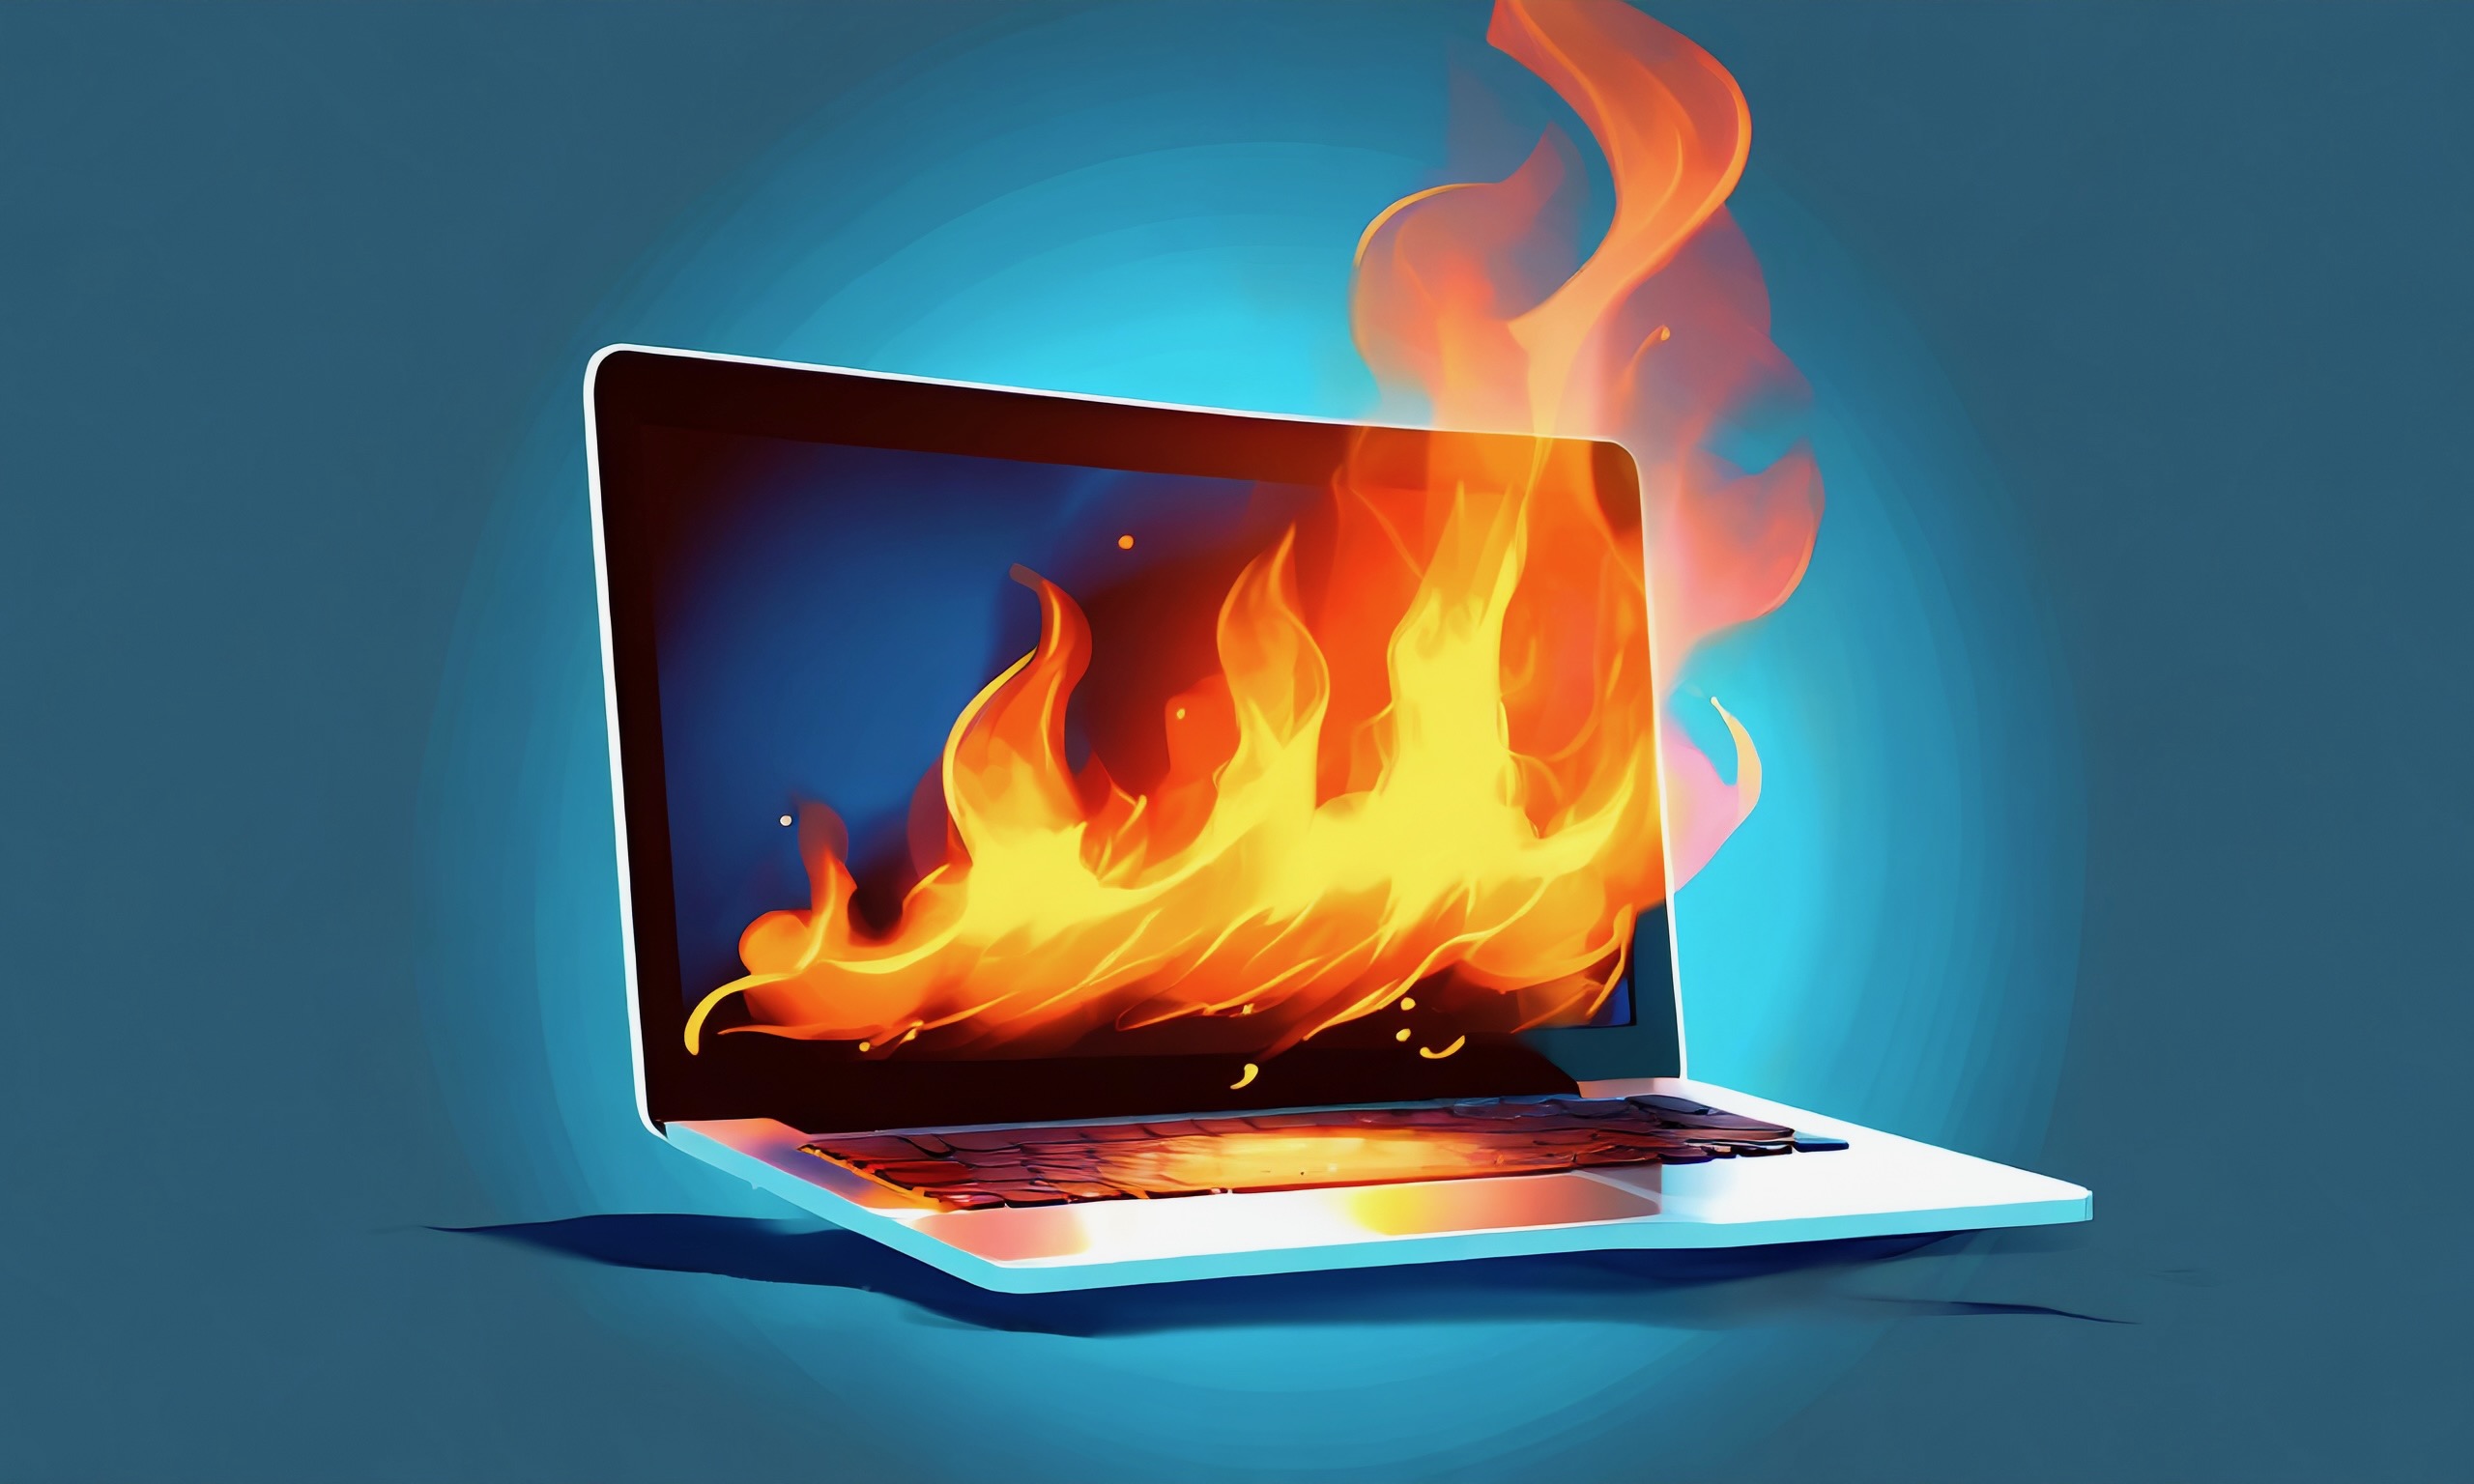 AI generated image of laptop on fire against a dark teal background.